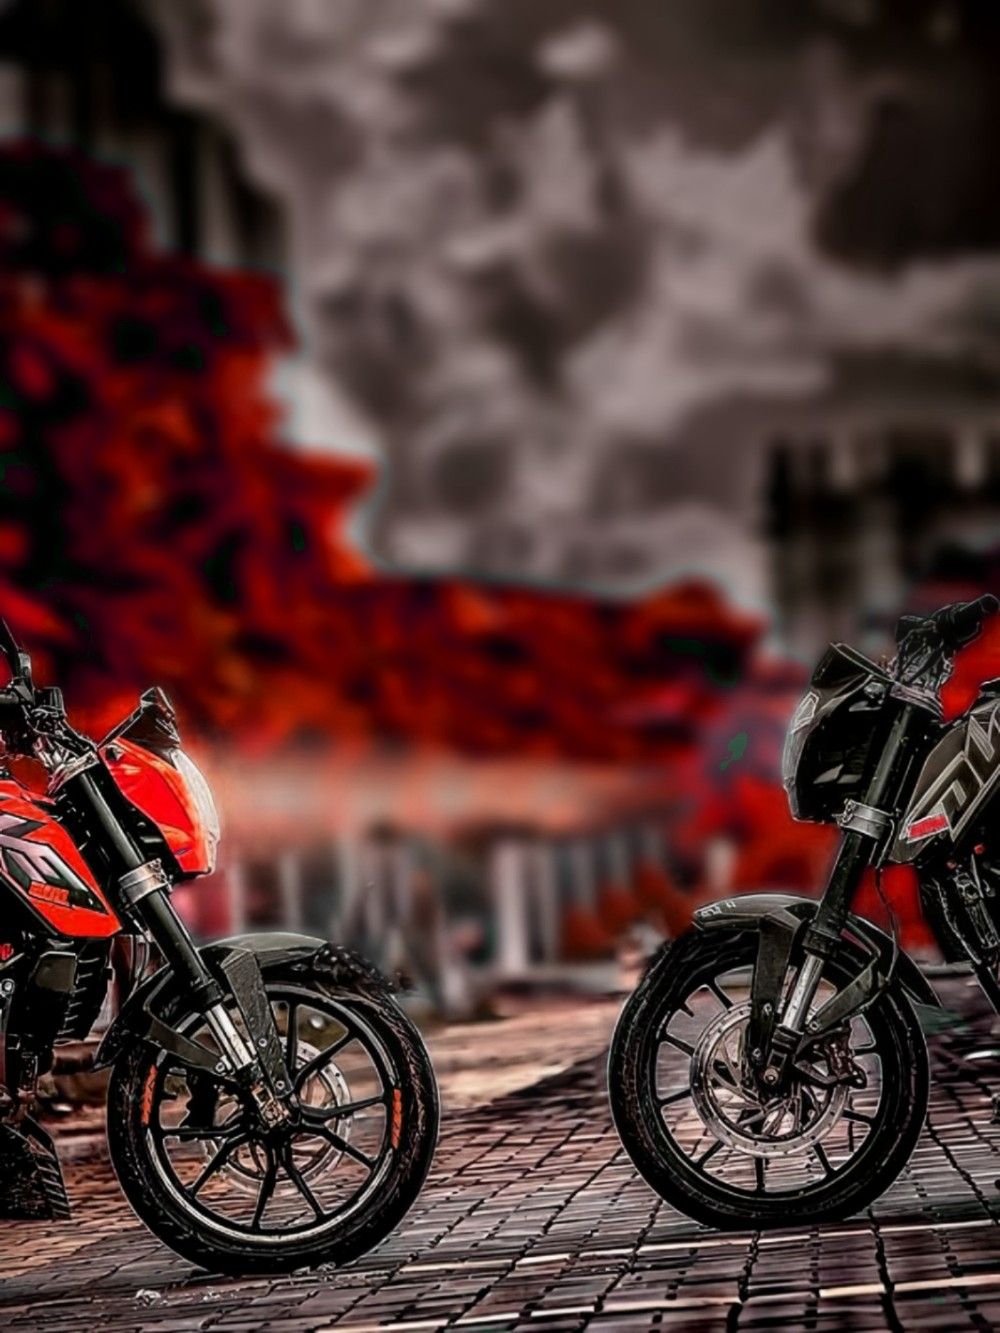 You are currently viewing Bike cb background